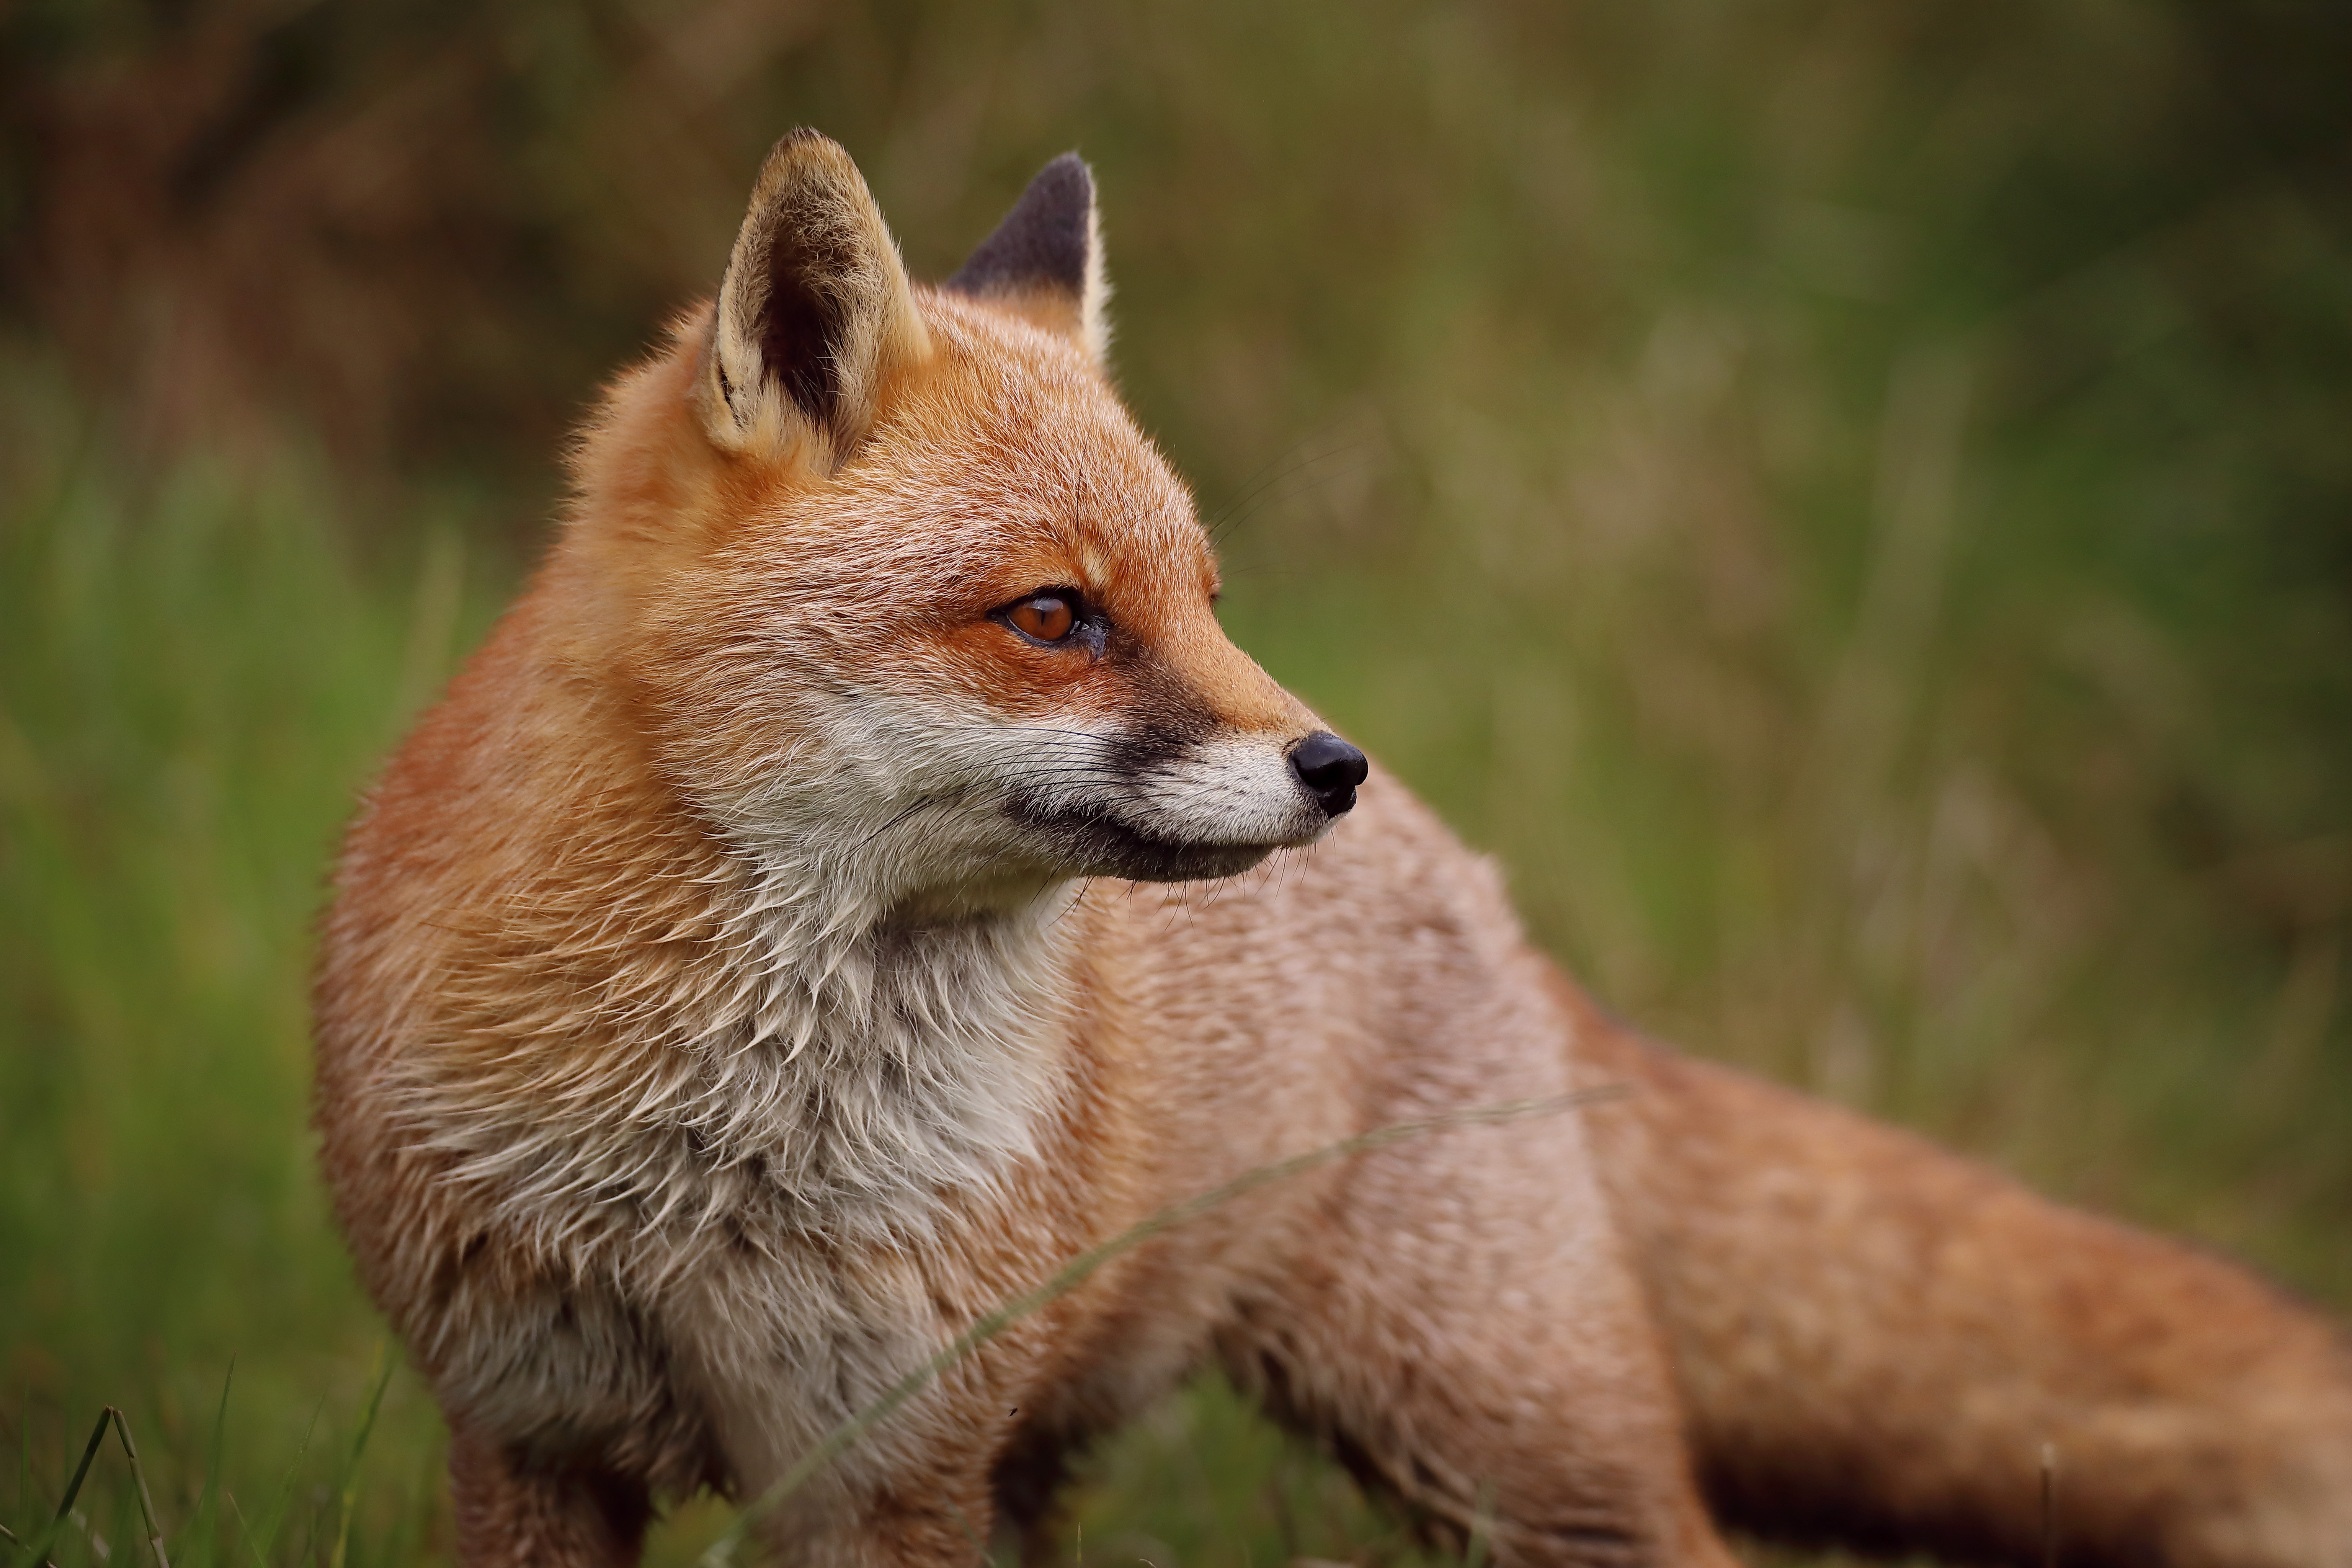 150544 download wallpaper fox, animals, predator, animal, profile screensavers and pictures for free